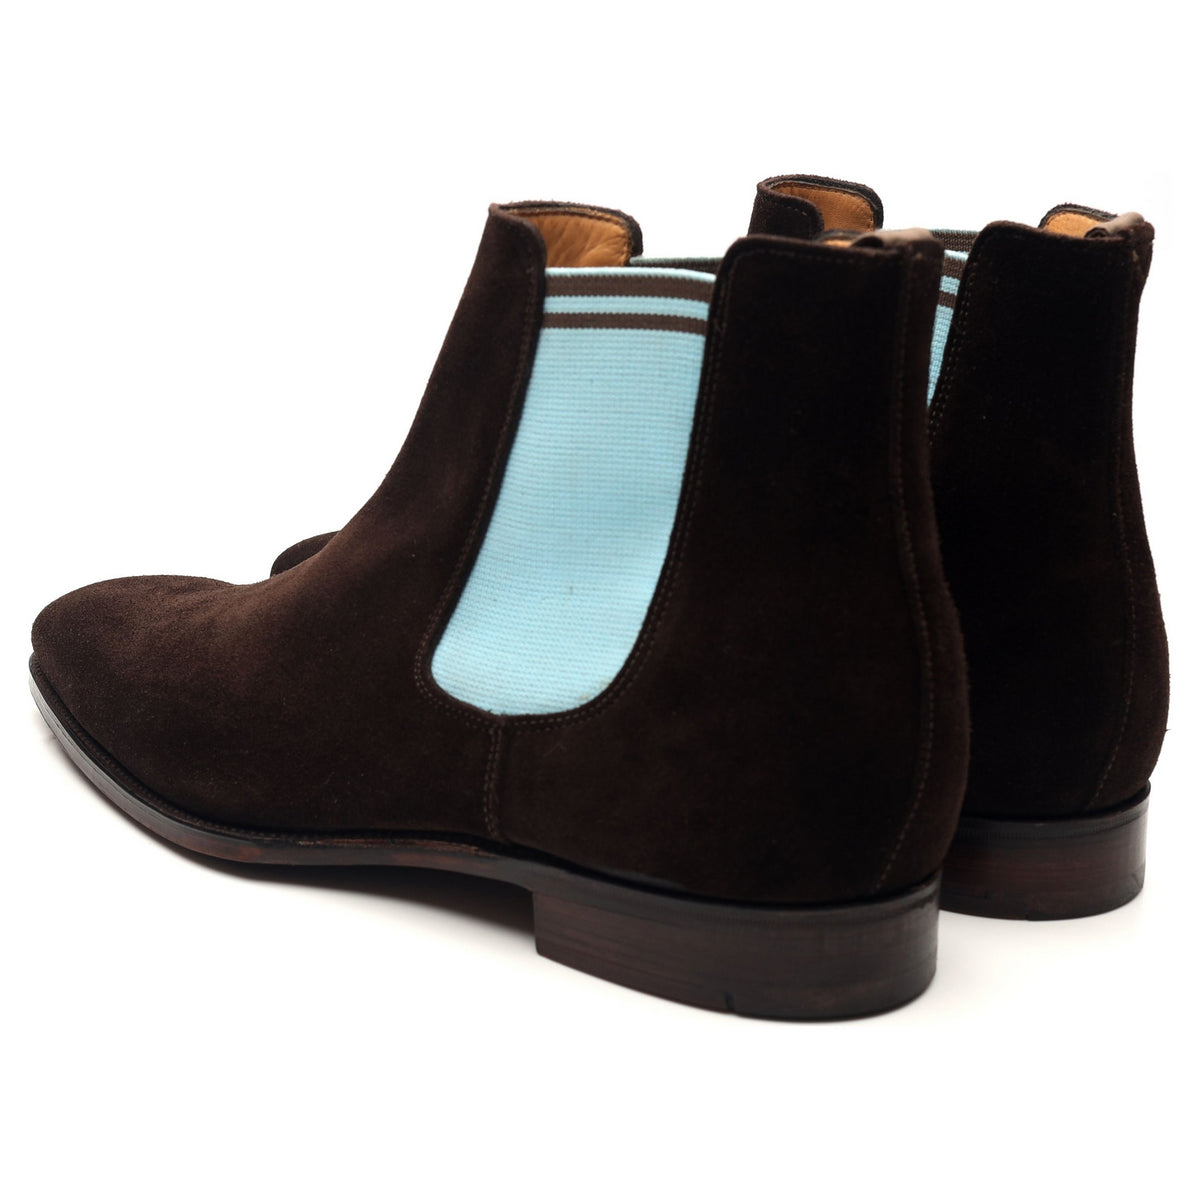 Ass forsikring rør Fred Perry Dark Brown Suede Chelsea Boots UK 11.5 F - Abbot's Shoes